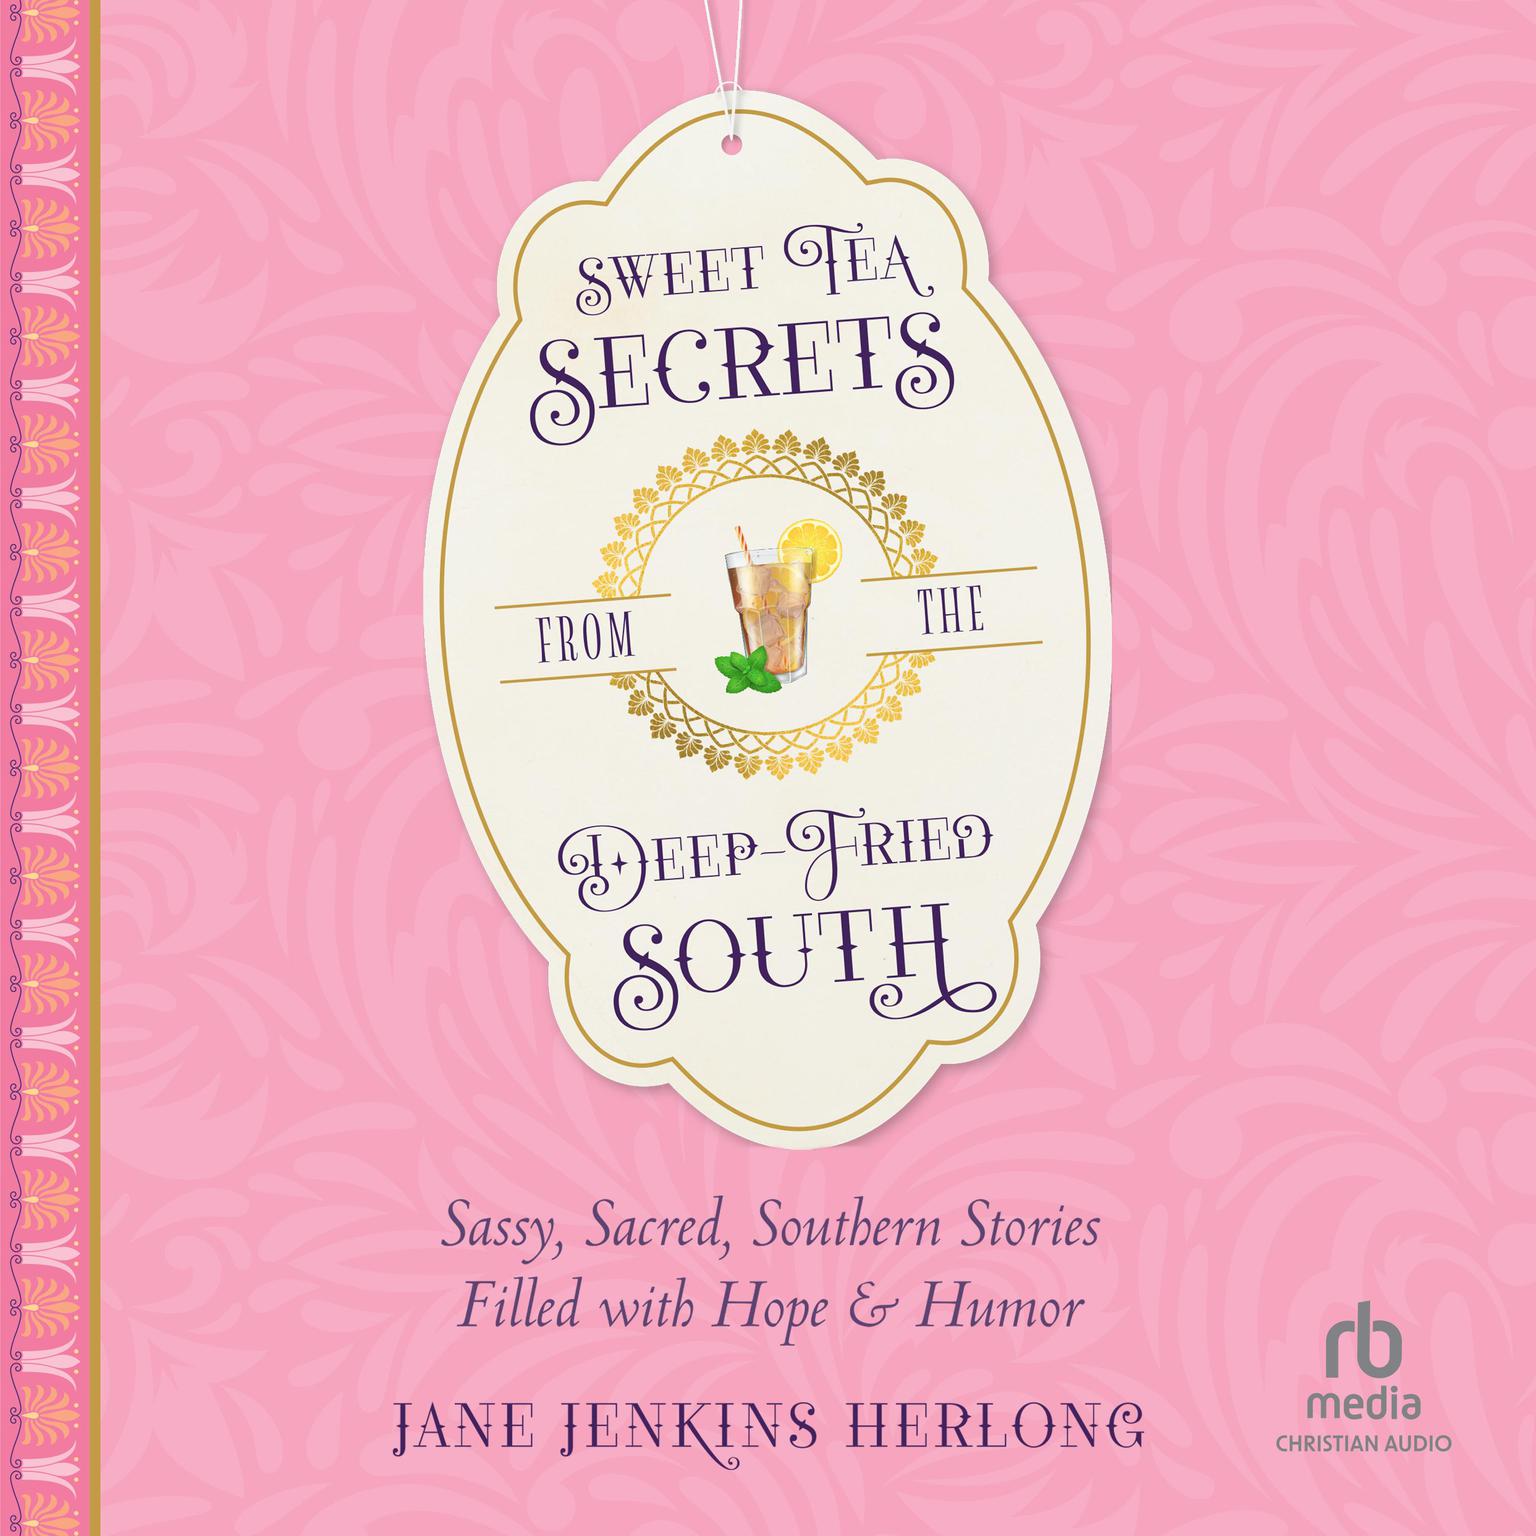 Sweet Tea Secrets from the Deep-Fried South: Sassy, Sacred, Southern Stories Filled with Hope and Humor Audiobook, by Jane Jenkins Herlong